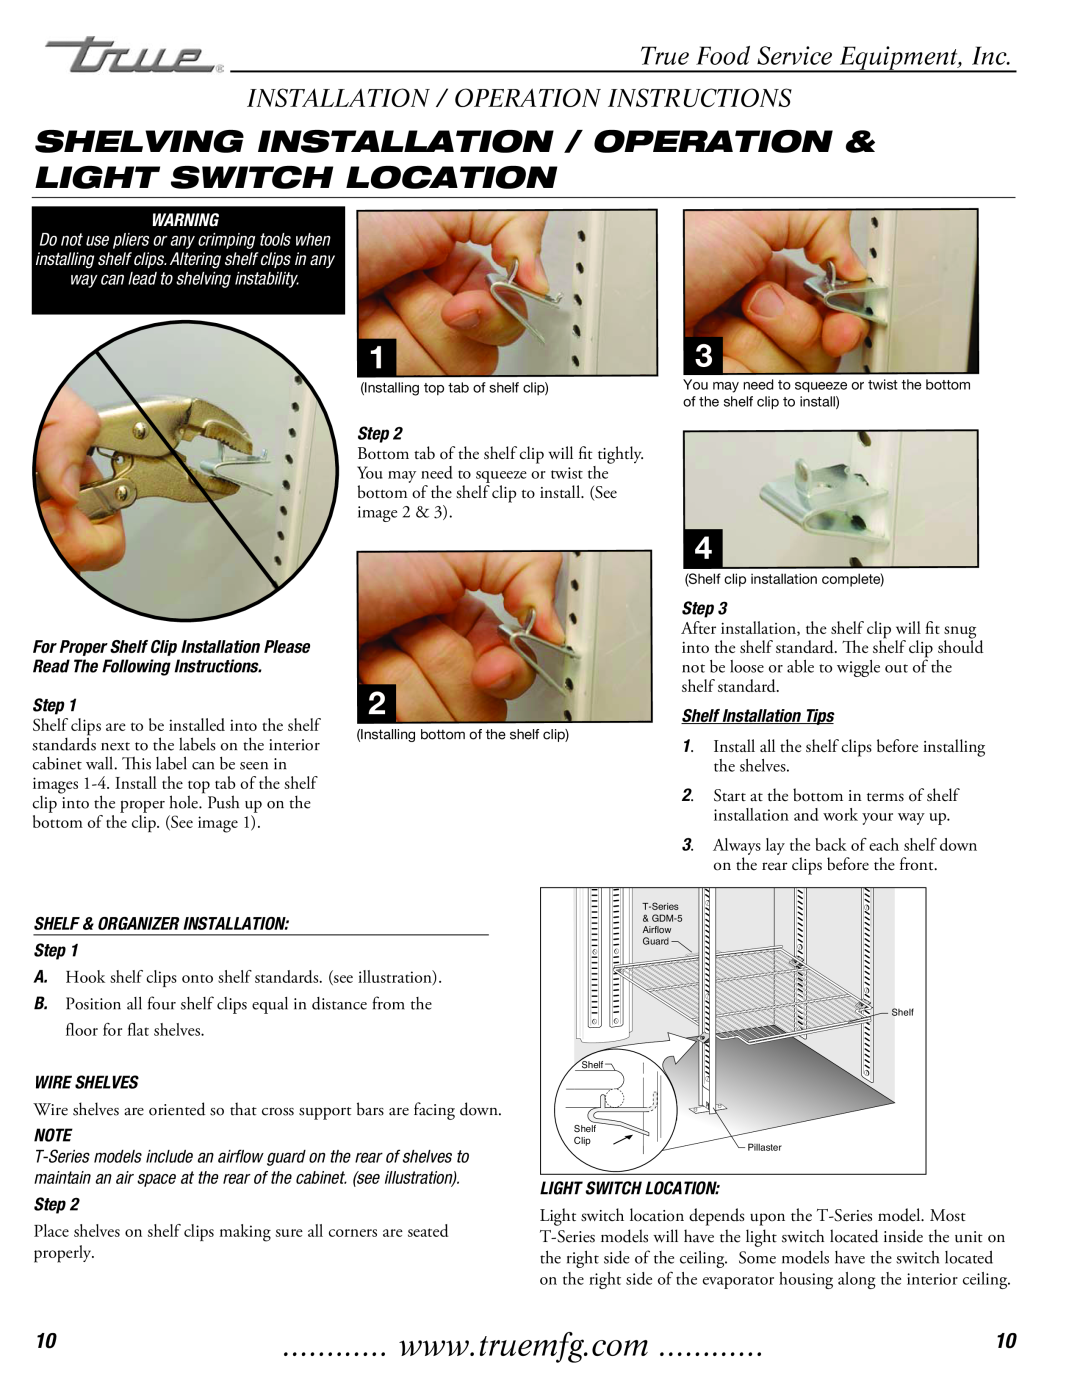 True Manufacturing Company T-23DT Shelving Installation / Operation & Light Switch Location, Step, Shelf Installation Tips 